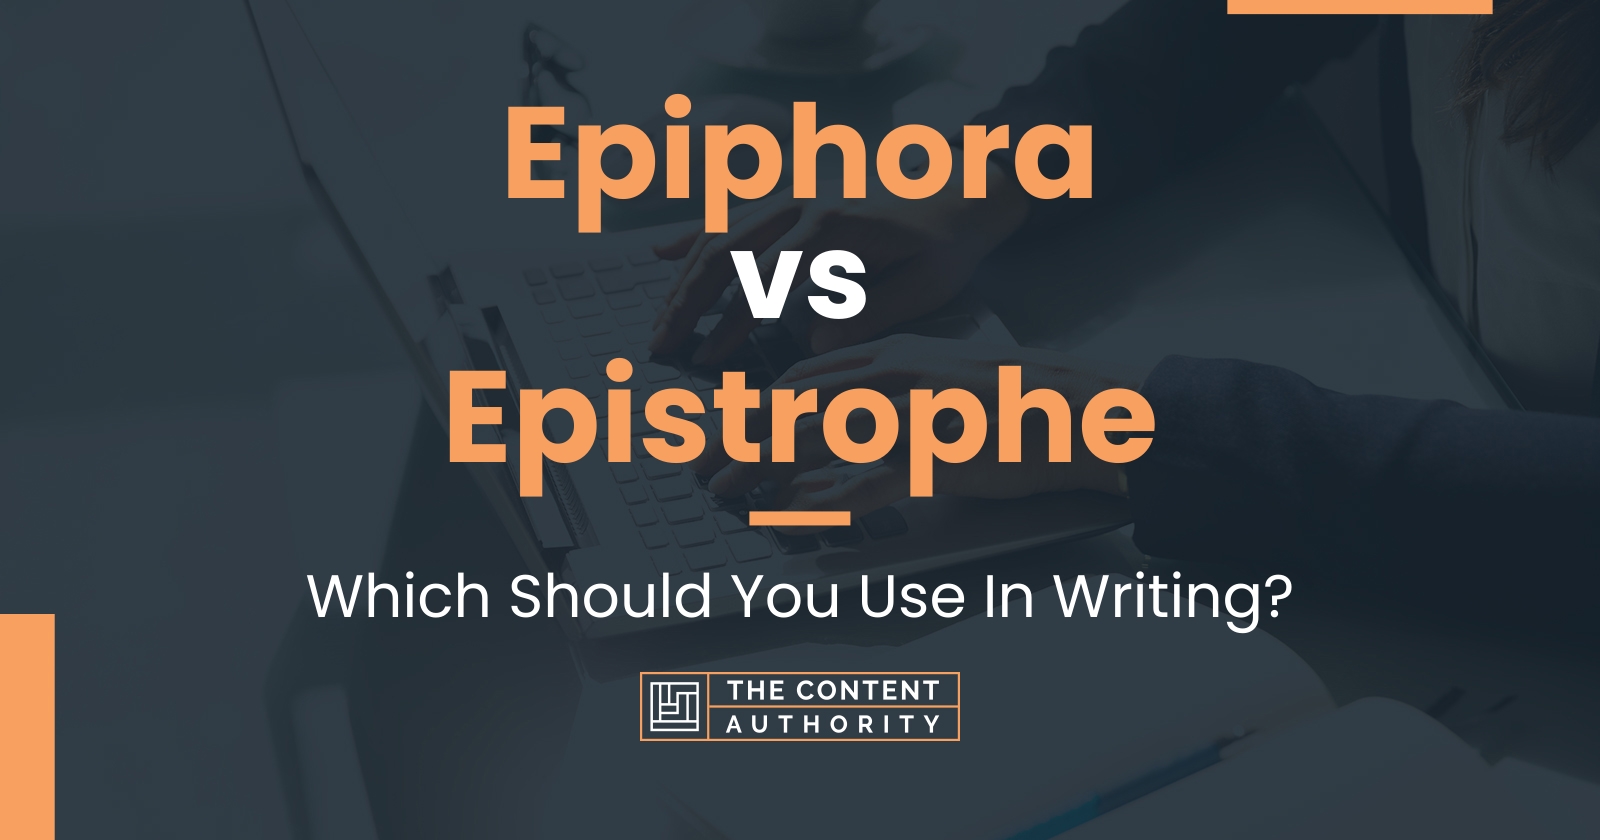 Epiphora vs Epistrophe: Which Should You Use In Writing?